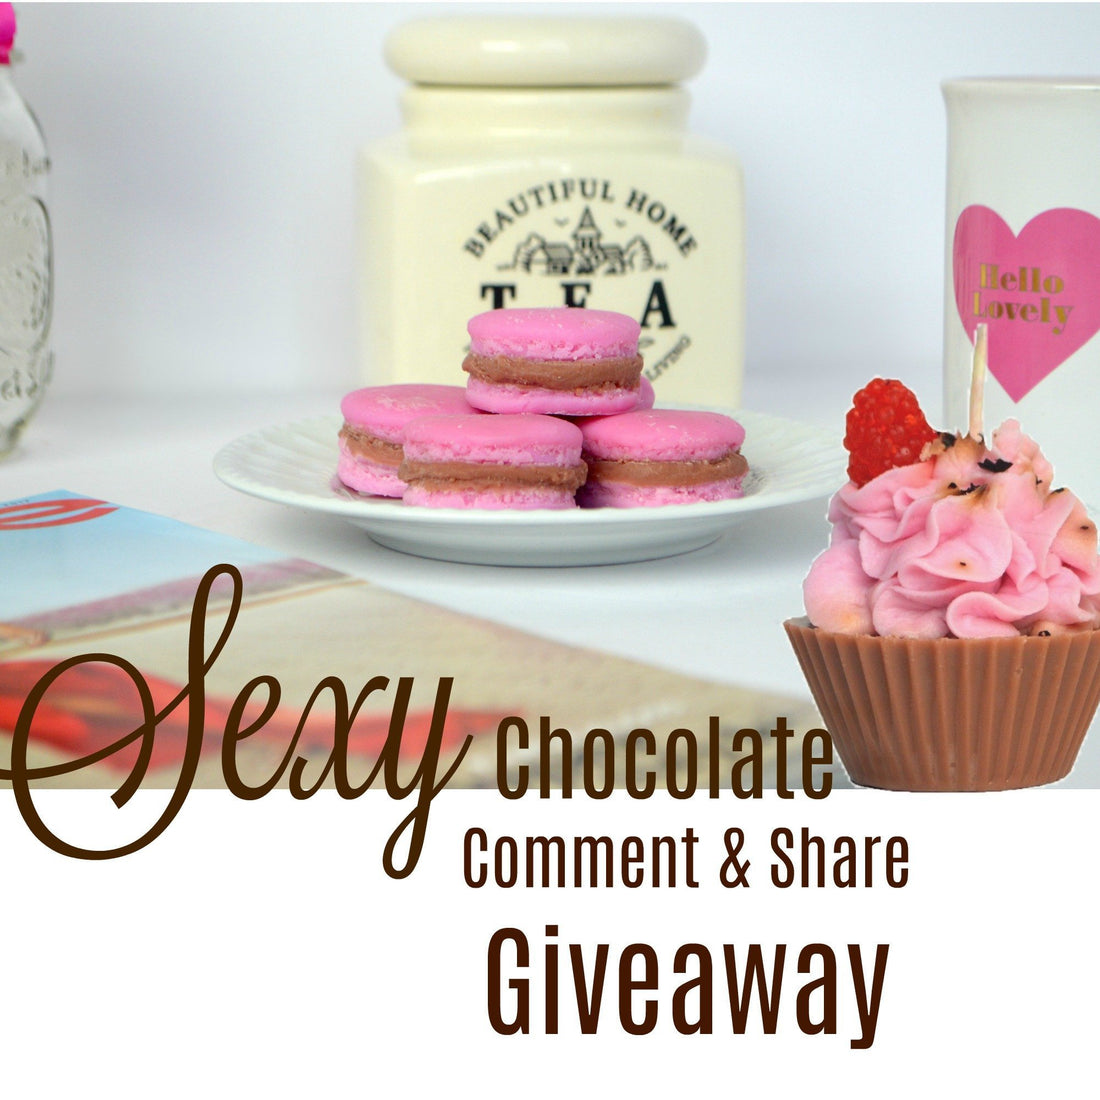 Sexy Chocolate Comment and Share Giveaway!